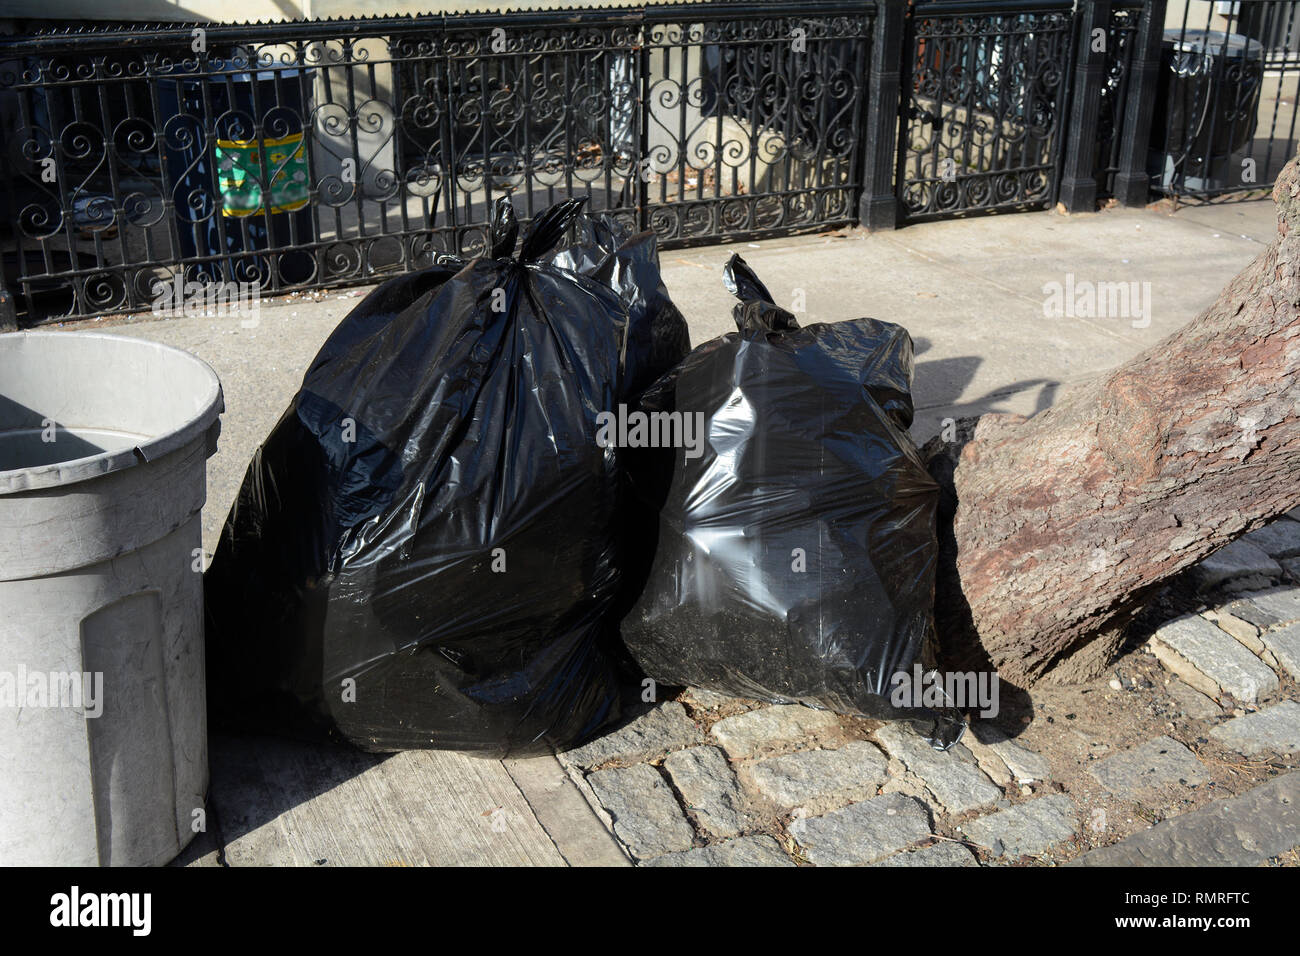 Garbage in Black Bags at Curb In City Stock Photo